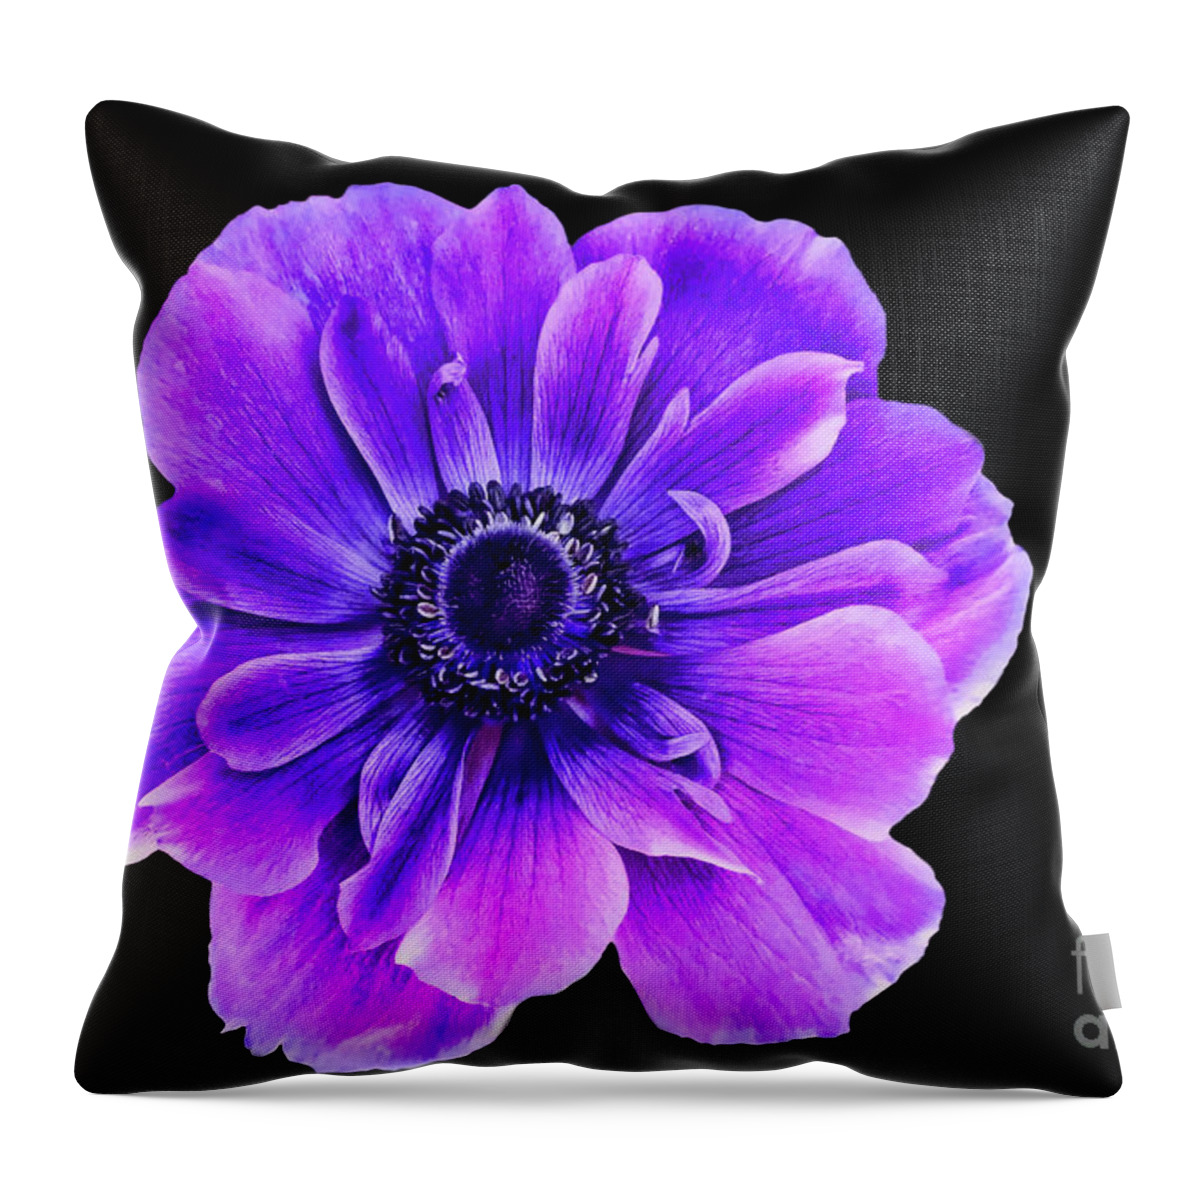 Purple Flower Throw Pillow featuring the photograph Purple Anemone Flower by Mariola Bitner